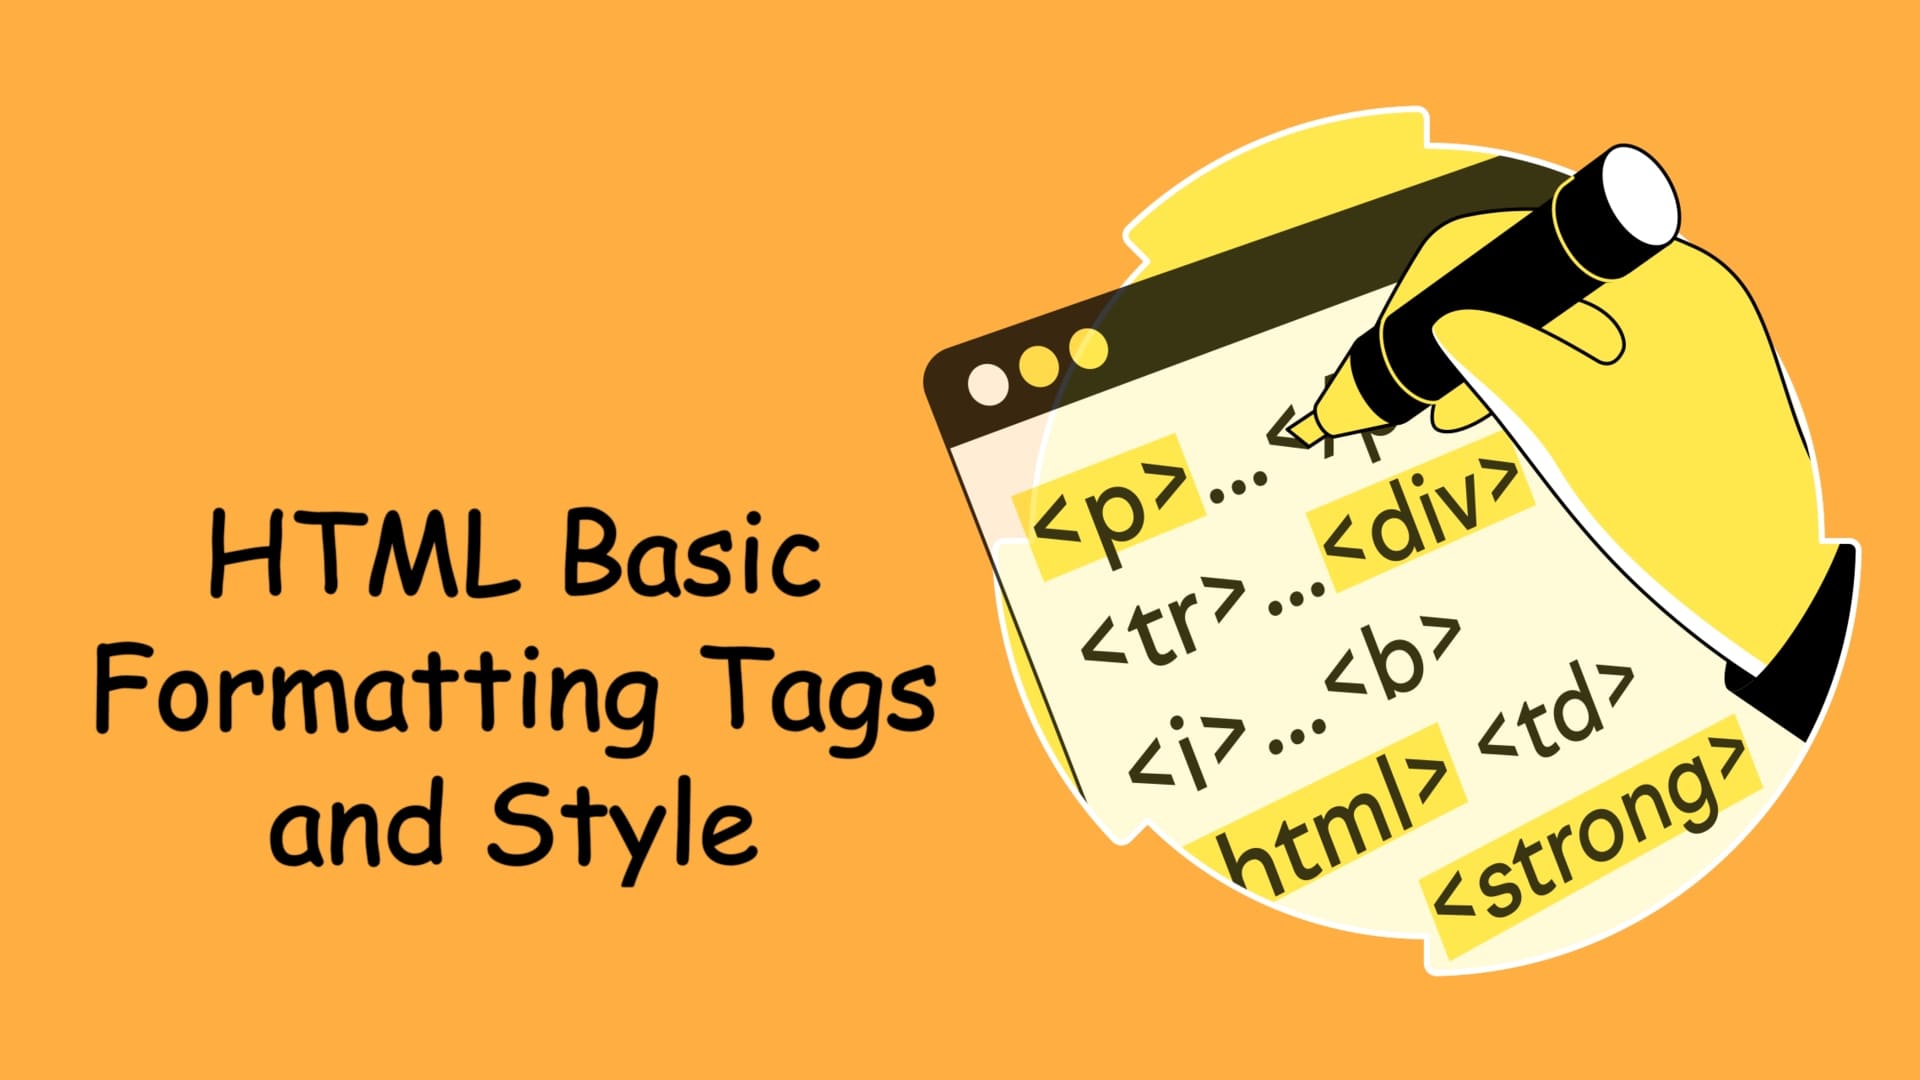 HTML Basic Formatting Tags and Style